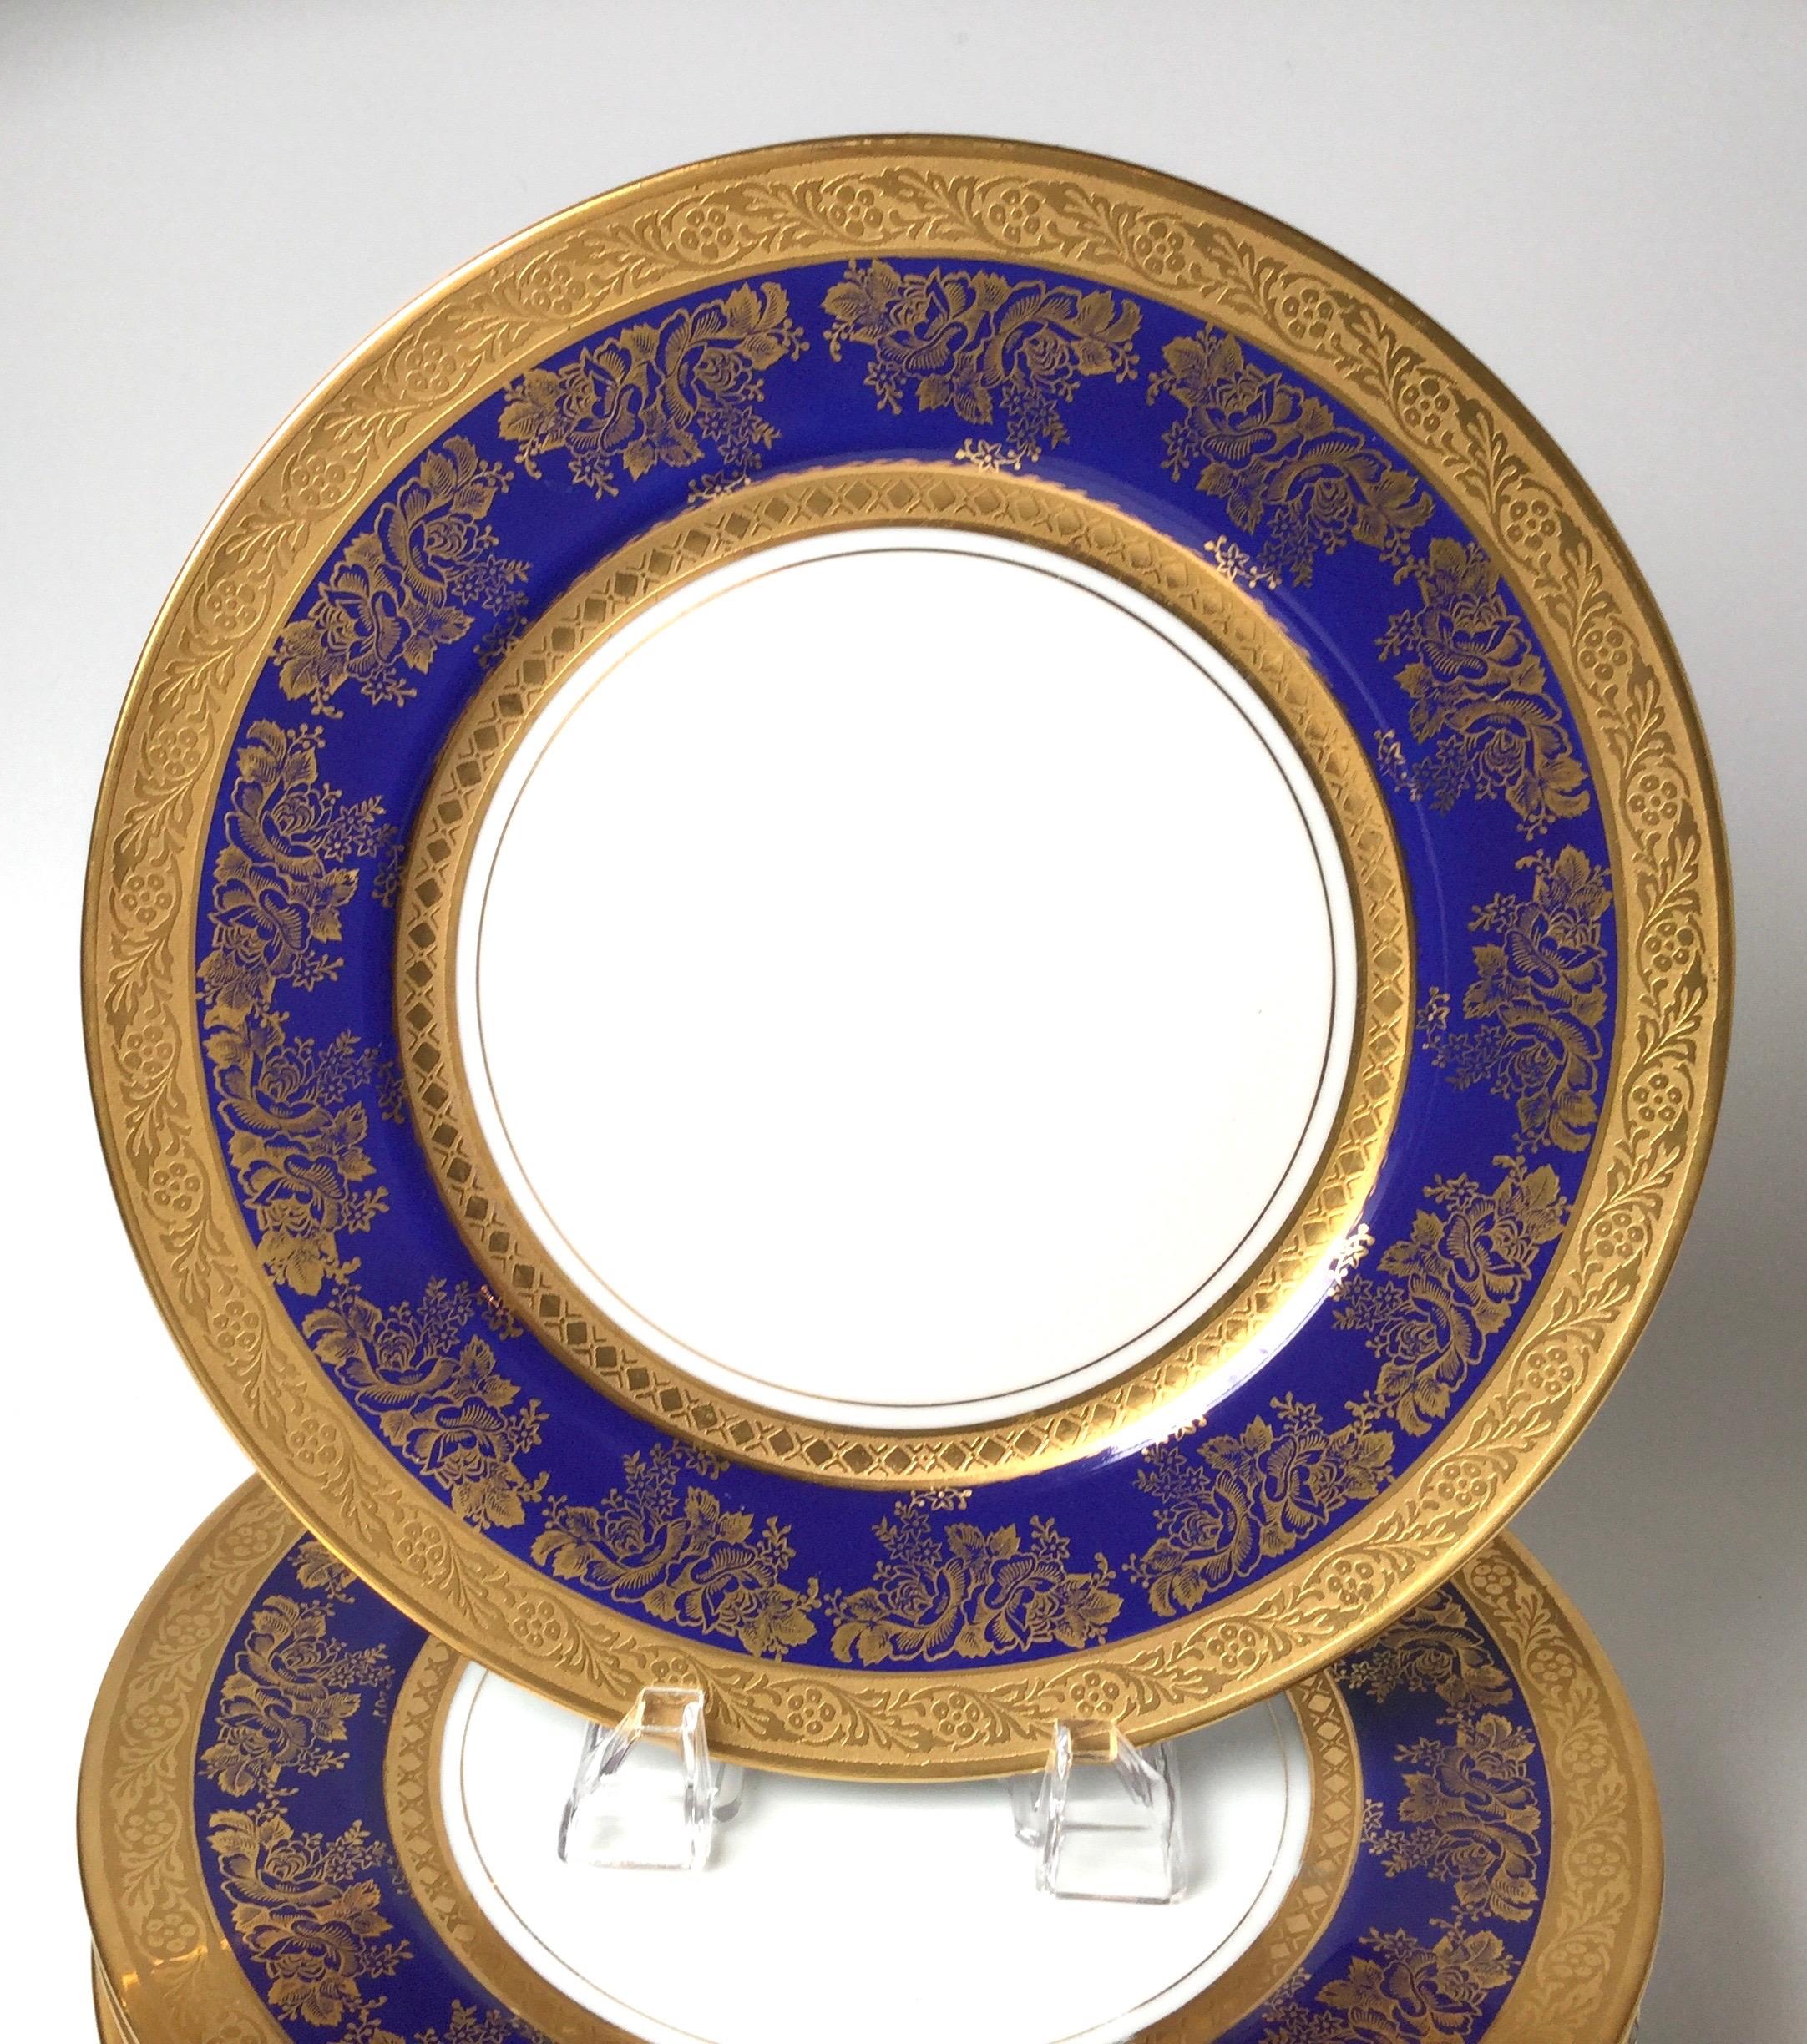 Set of eight gold and cobalt blue service/dinner plates Royal Doulton, circa 1900-1920.
Dimensions: 11 inches. diameter.